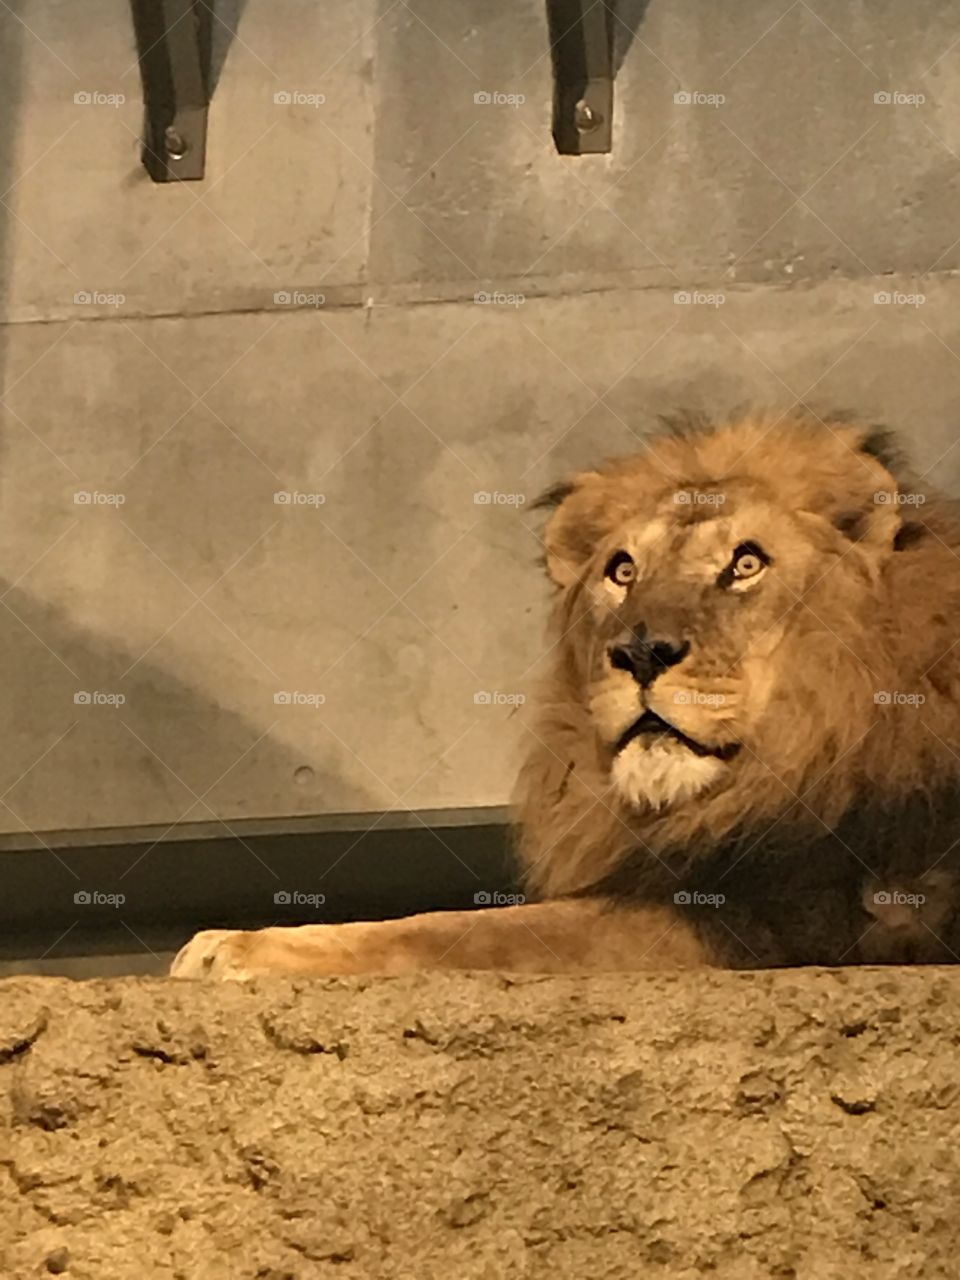 the lion in maruyama zoo